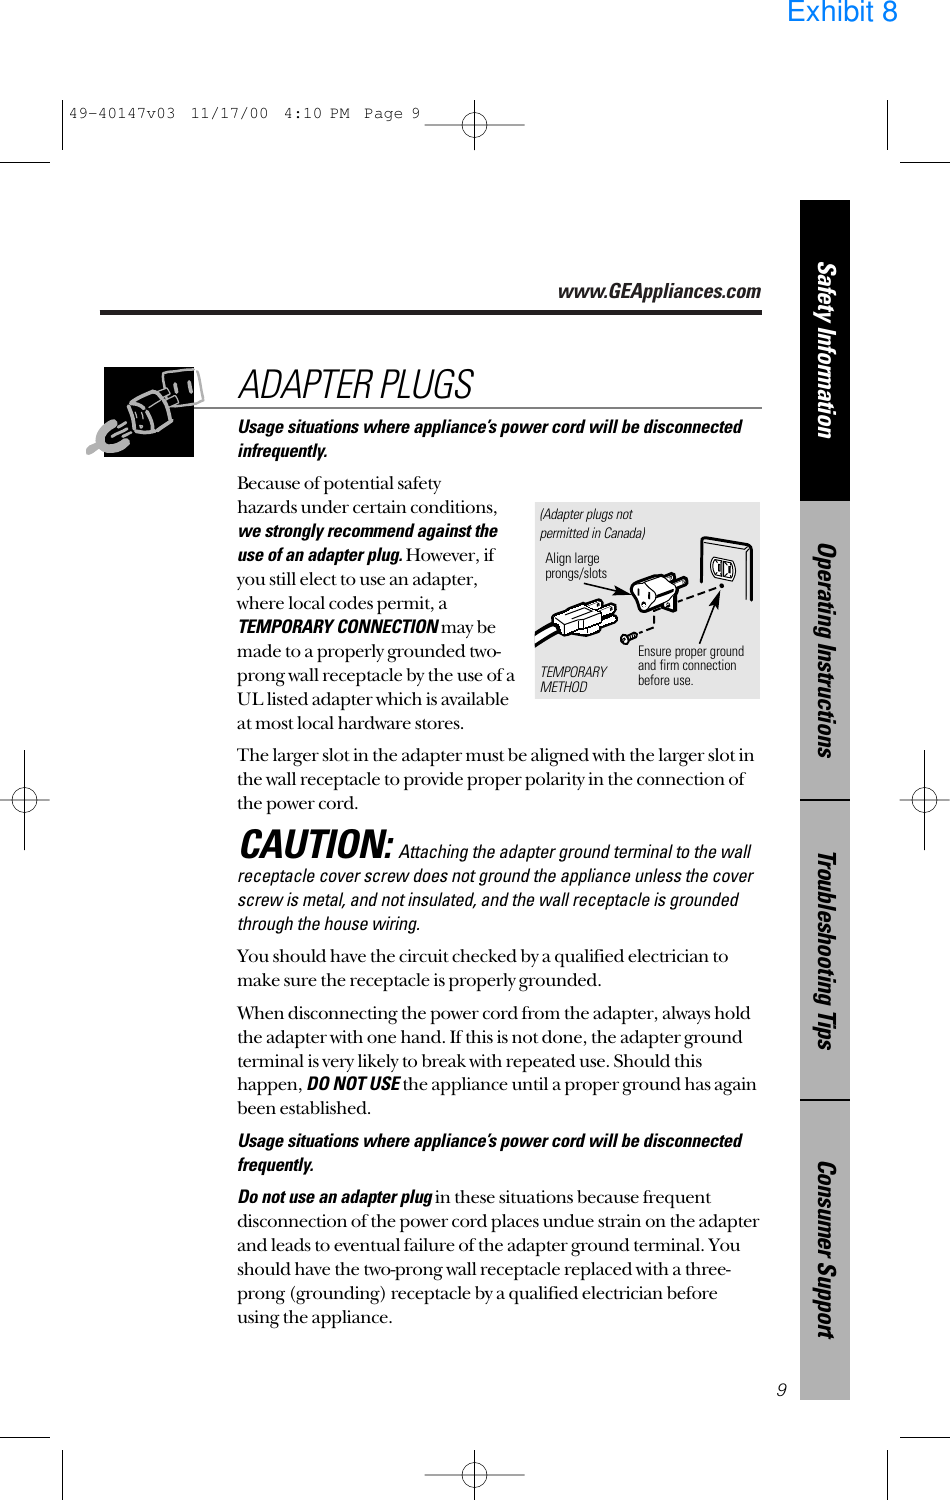 www.GEAppliances.comConsumer SupportTroubleshooting TipsOperating InstructionsSafety InformationUsage situations where appliance’s power cord will be disconnectedinfrequently.Because of potential safety hazards under certain conditions,we strongly recommend against the use of an adapter plug.However, if you still elect to use an adapter, where local codes permit, aTEMPORARY CONNECTIONmay bemade to a properly grounded two-prong wall receptacle by the use of aUL listed adapter which is available at most local hardware stores.The larger slot in the adapter must be aligned with the larger slot inthe wall receptacle to provide proper polarity in the connection ofthe power cord.CAUTION:Attaching the adapter ground terminal to the wallreceptacle cover screw does not ground the appliance unless the coverscrew is metal, and not insulated, and the wall receptacle is groundedthrough the house wiring. You should have the circuit checked by a qualified electrician tomake sure the receptacle is properly grounded.When disconnecting the power cord from the adapter, always holdthe adapter with one hand. If this is not done, the adapter groundterminal is very likely to break with repeated use. Should thishappen, DO NOT USEthe appliance until a proper ground has againbeen established.Usage situations where appliance’s power cord will be disconnectedfrequently.Do not use an adapter plugin these situations because frequentdisconnection of the power cord places undue strain on the adapterand leads to eventual failure of the adapter ground terminal. Youshould have the two-prong wall receptacle replaced with a three-prong (grounding) receptacle by a qualified electrician beforeusing the appliance.ADAPTER PLUGS9Ensure proper ground and firm connectionbefore use.TEMPORARYMETHODAlign largeprongs/slots(Adapter plugs notpermitted in Canada)49-40147v03  11/17/00  4:10 PM  Page 9Exhibit 8